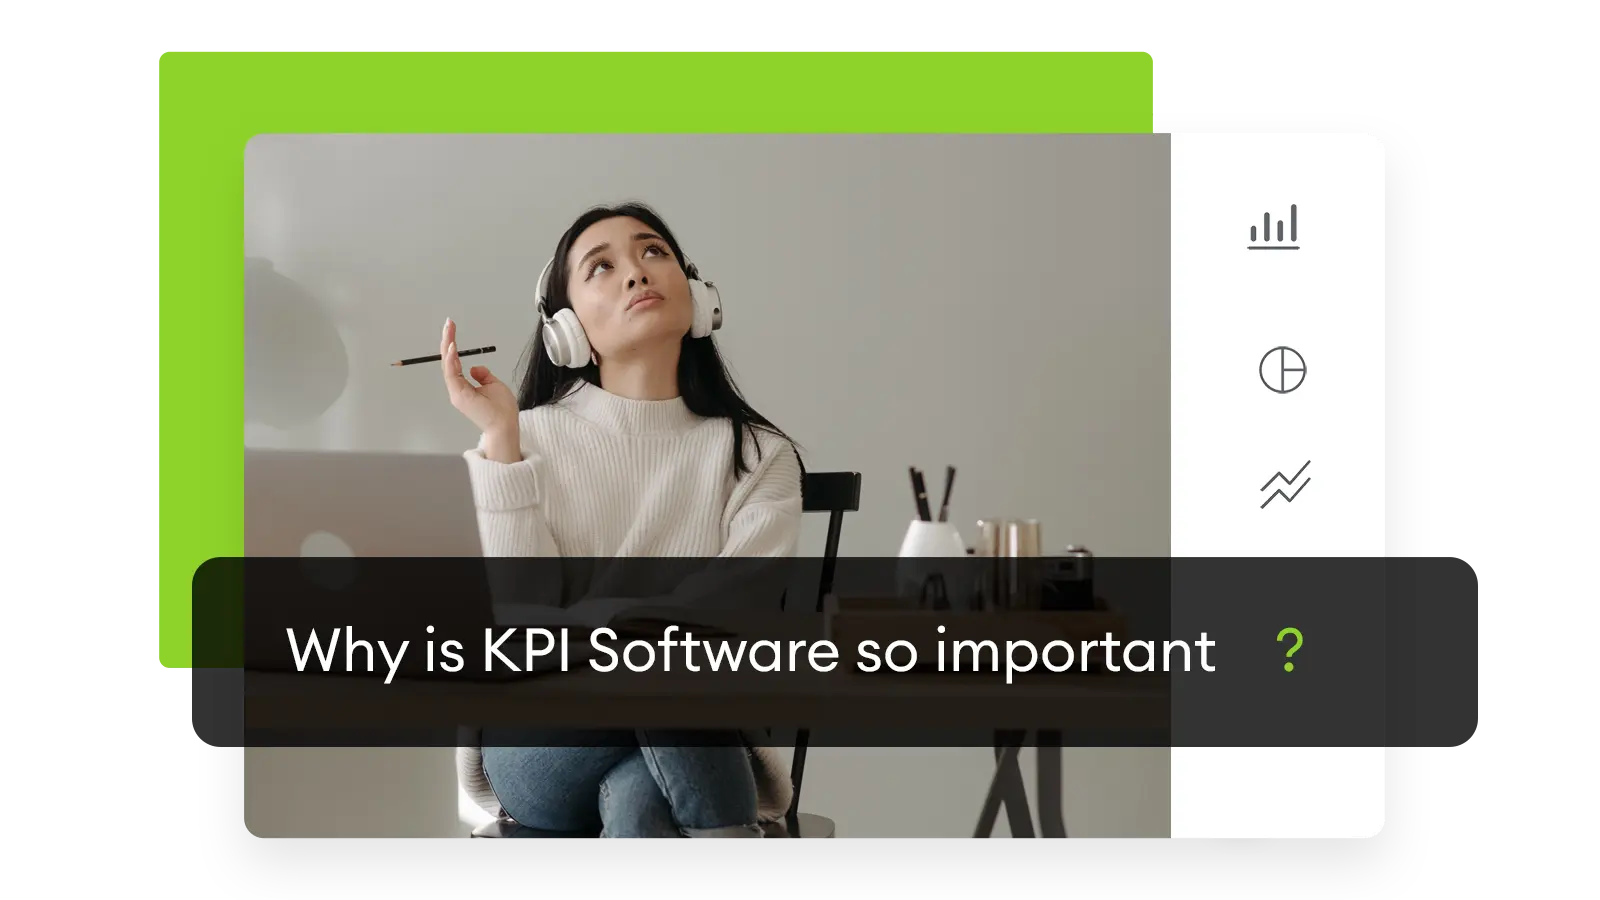 A woman sat thoughtfully with why is KPI software so important overlayed